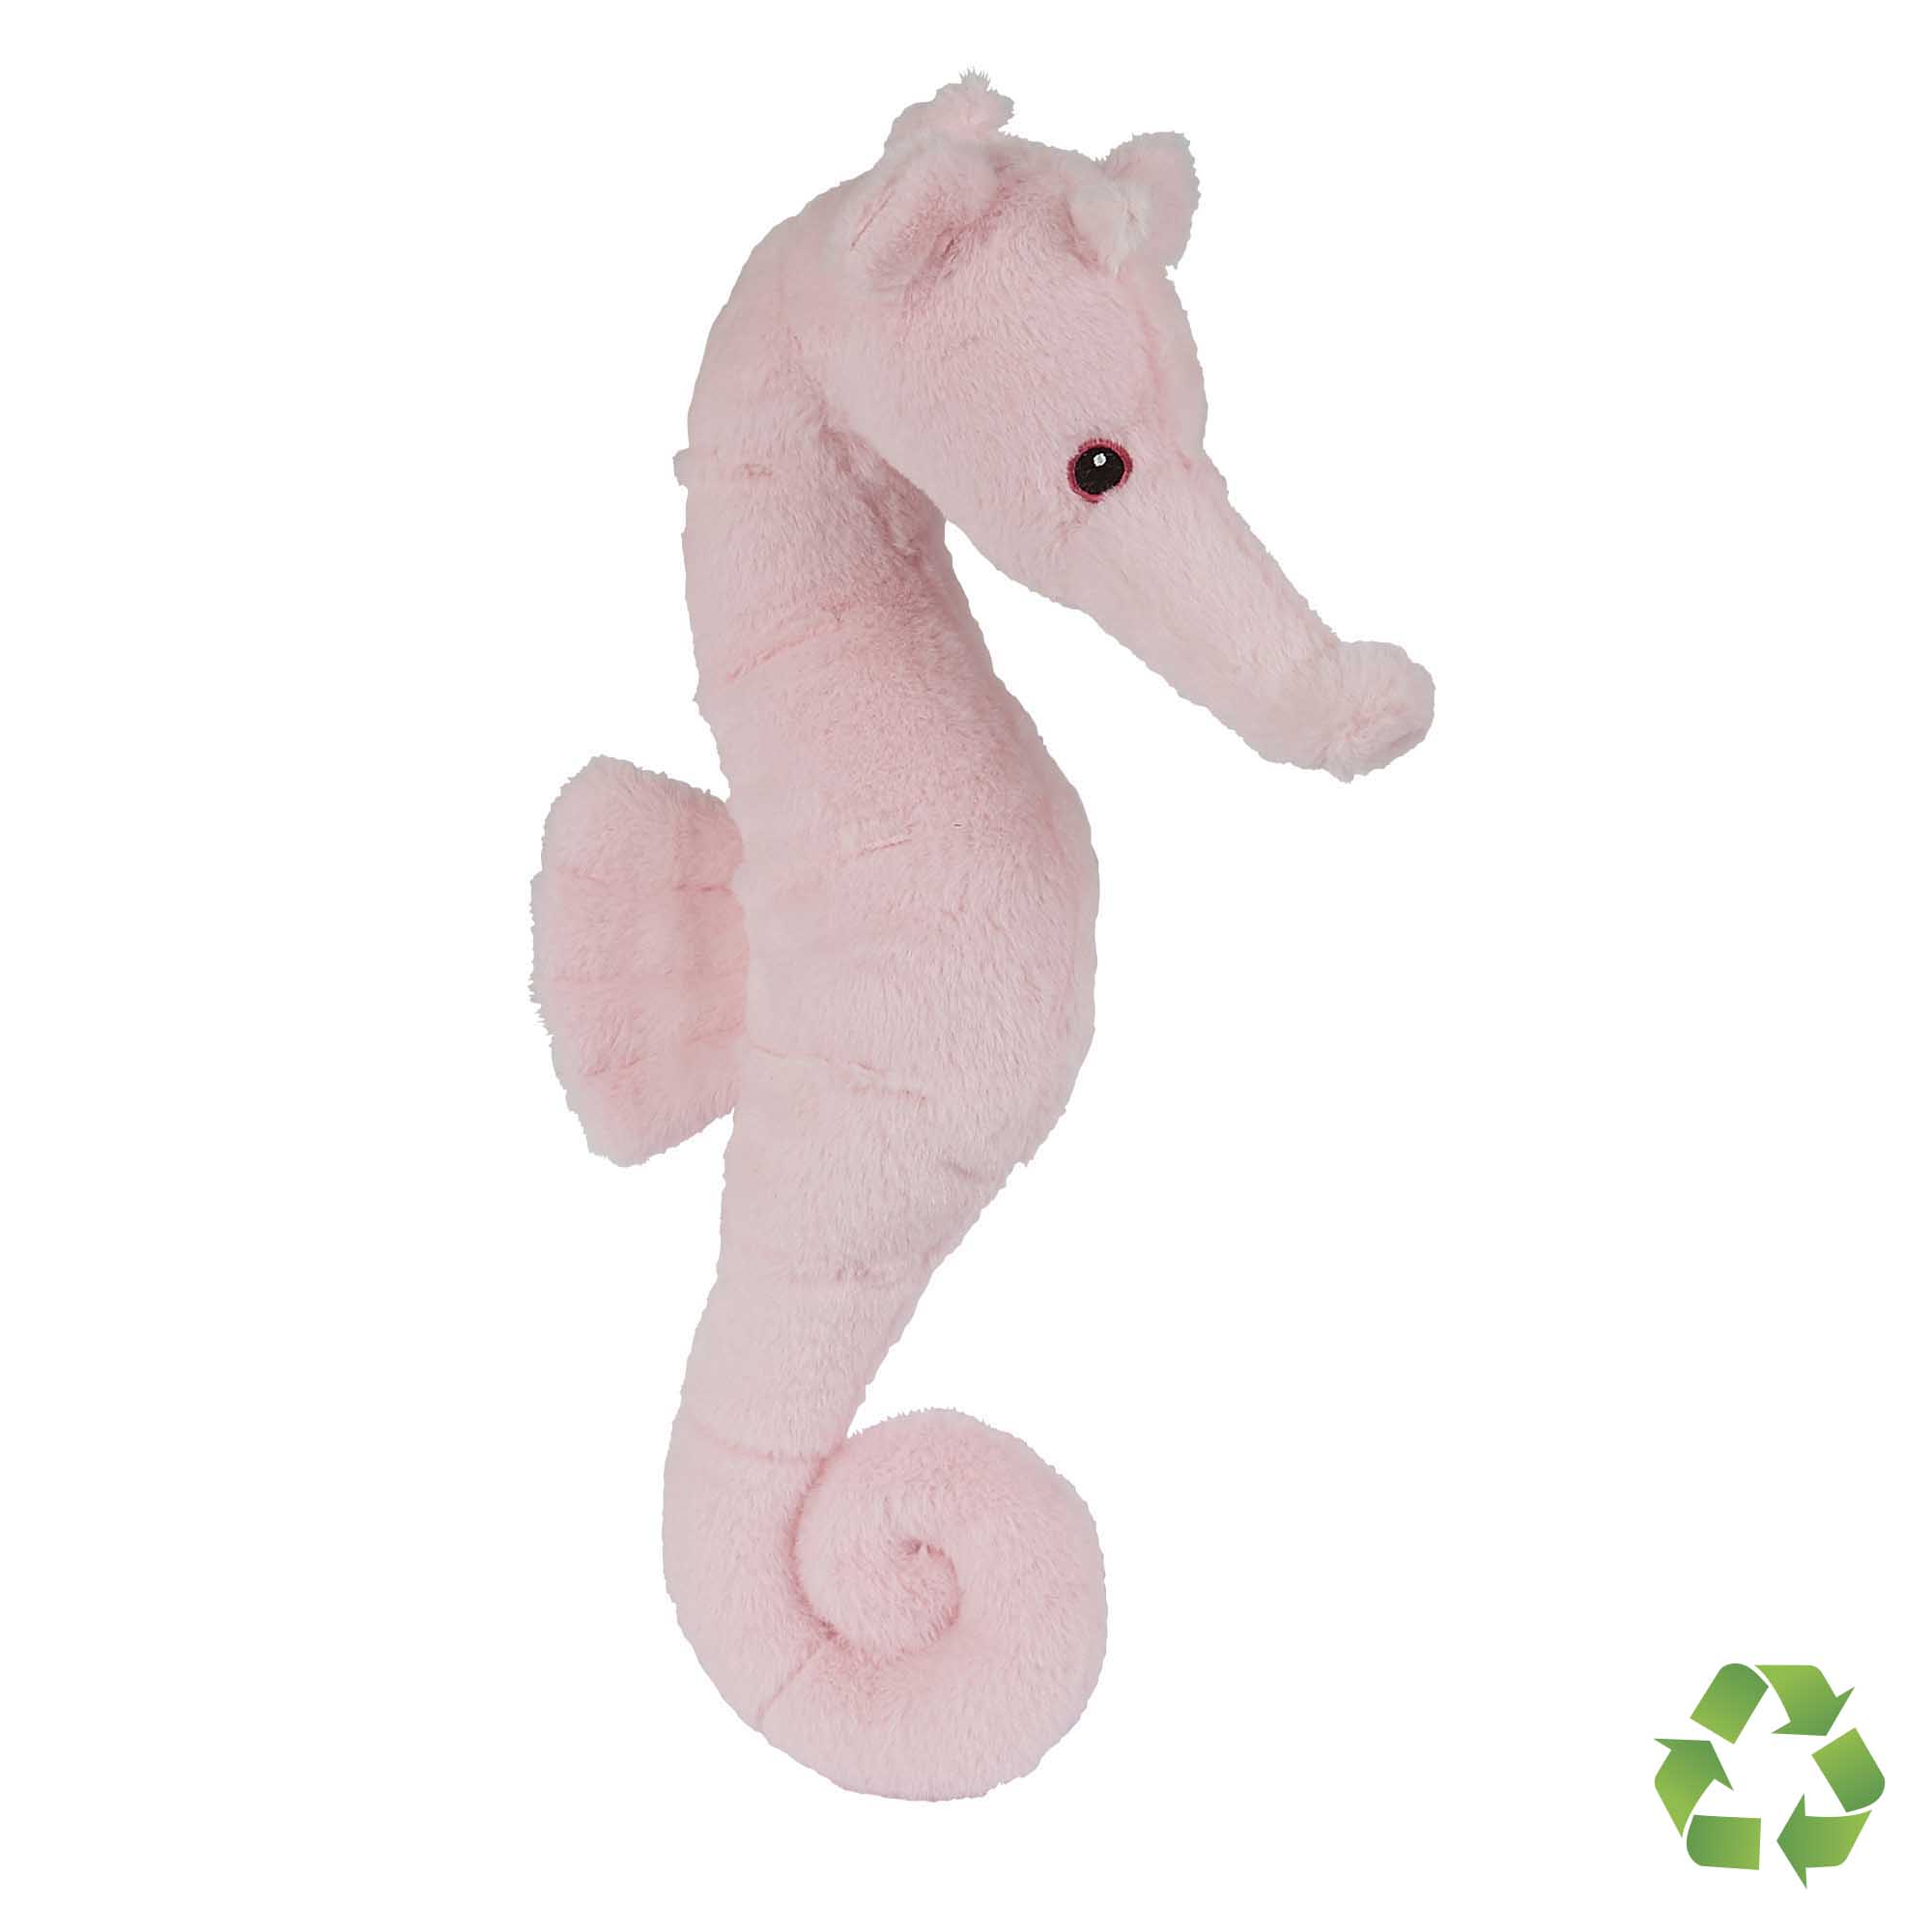 Bespoke Suppliers of Toy Seahorse for Safari Centres